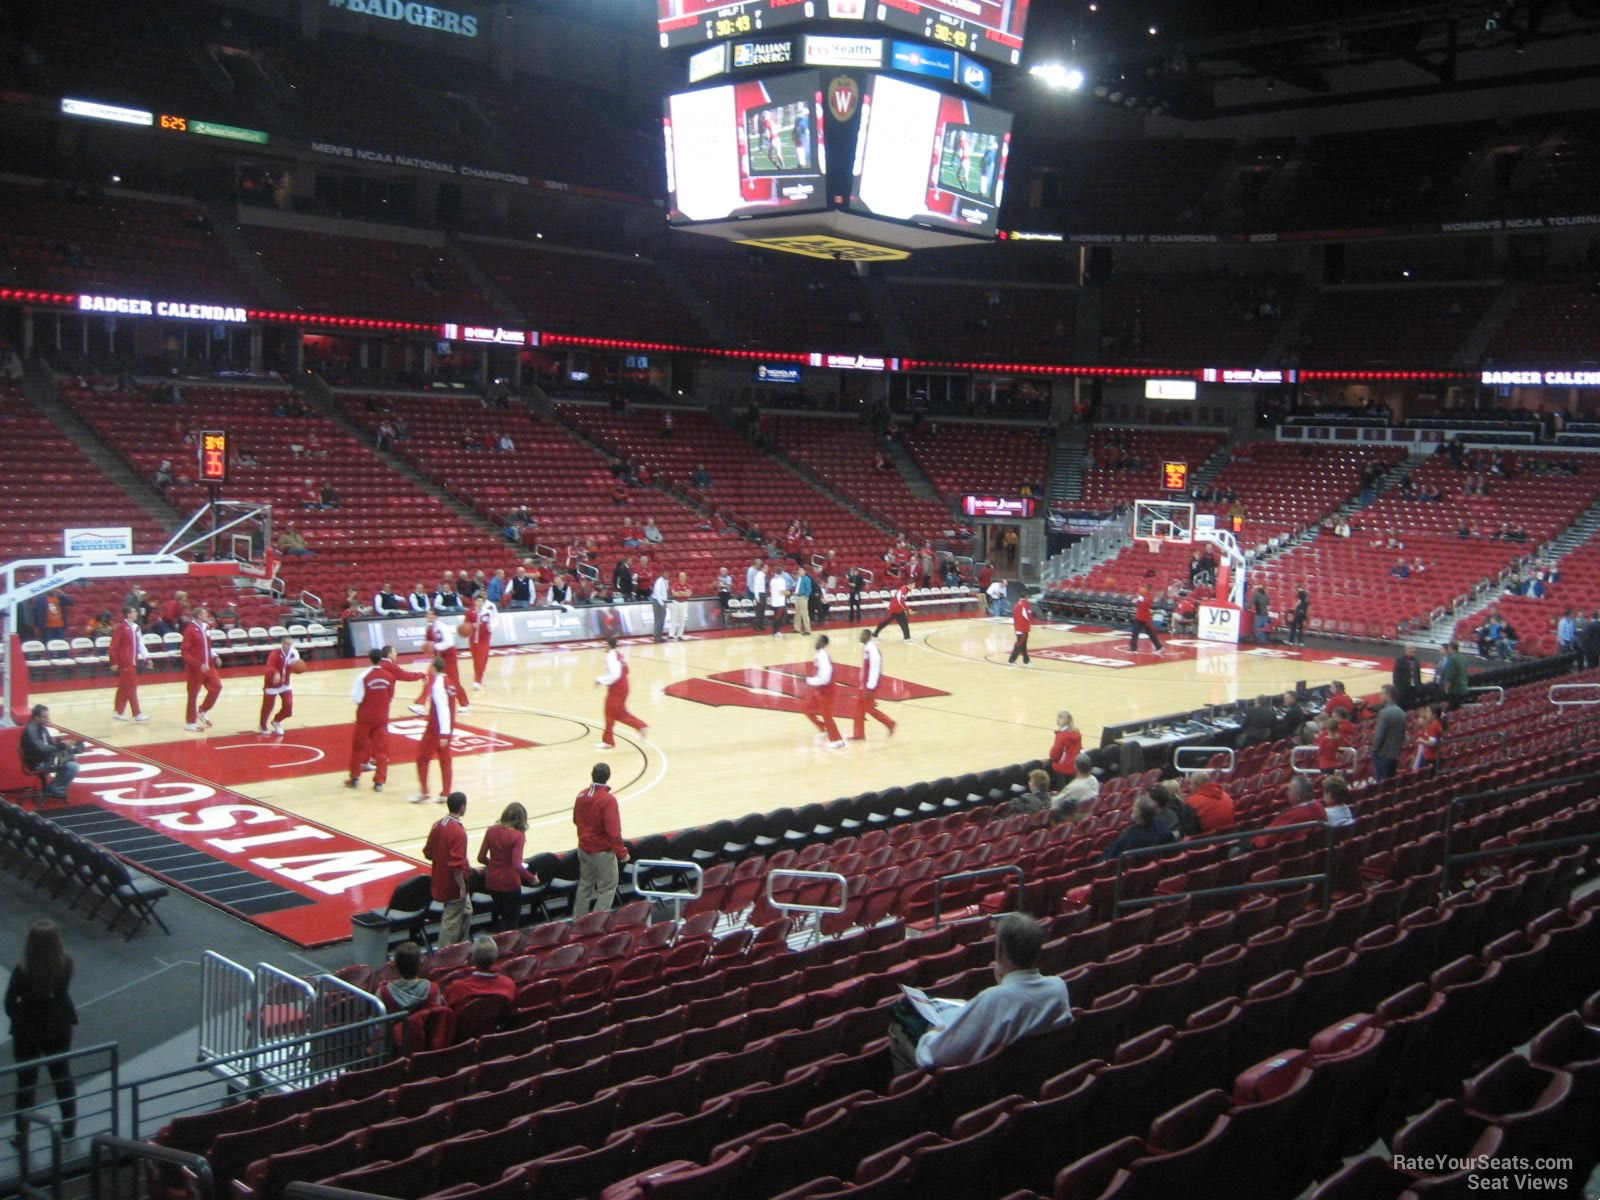 Kohl Center Hockey Seating Chart With Rows